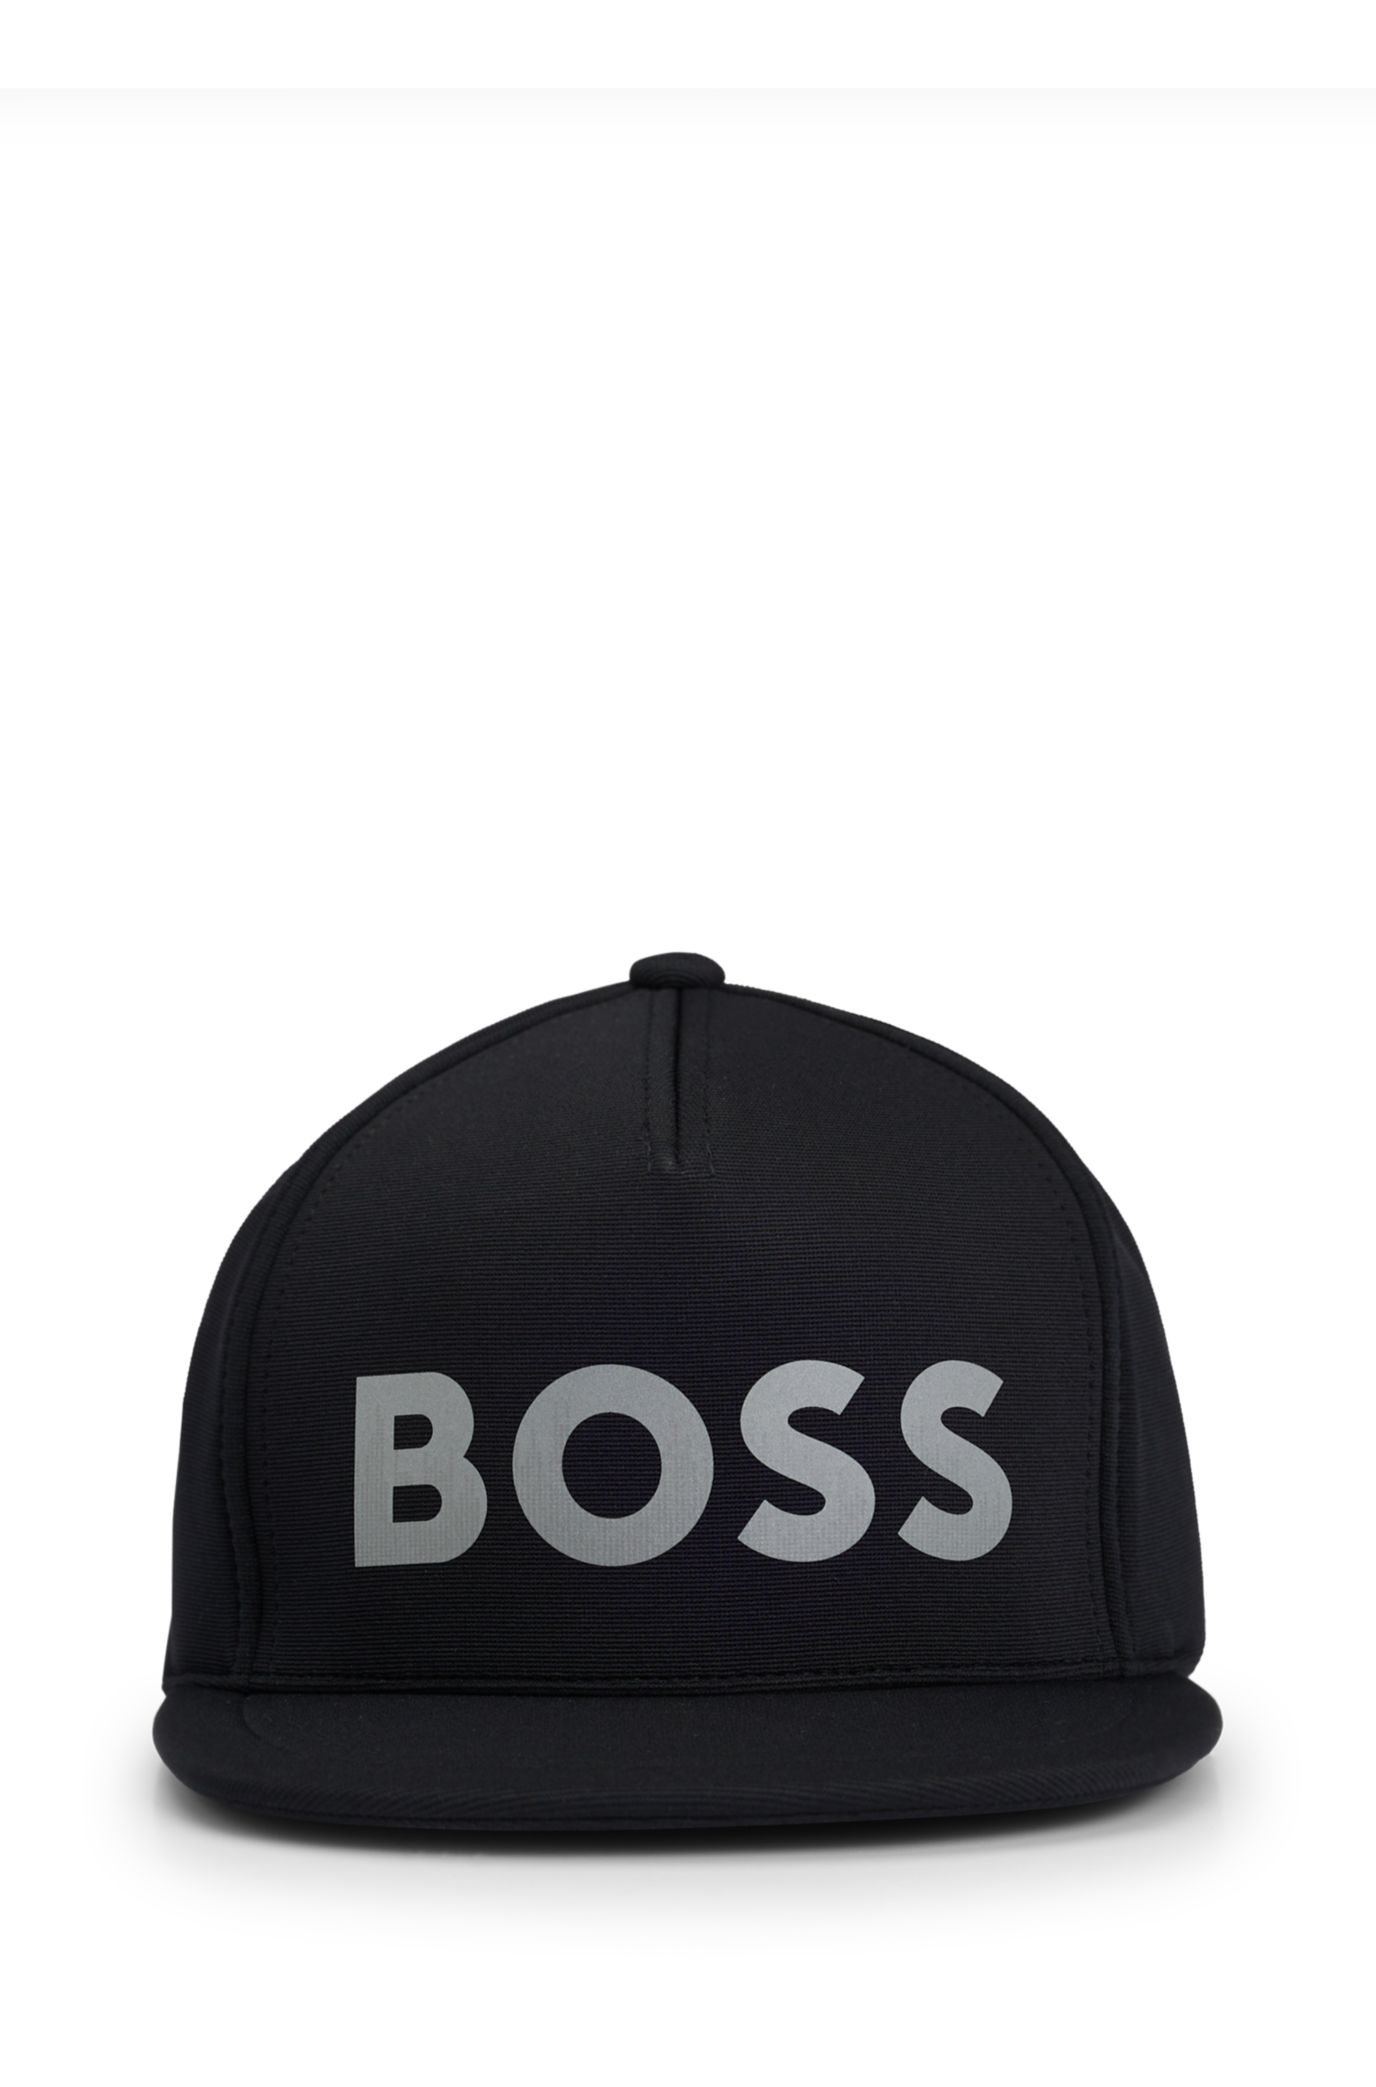 - BOSS decorative logo with Stretch-jersey cap reflective